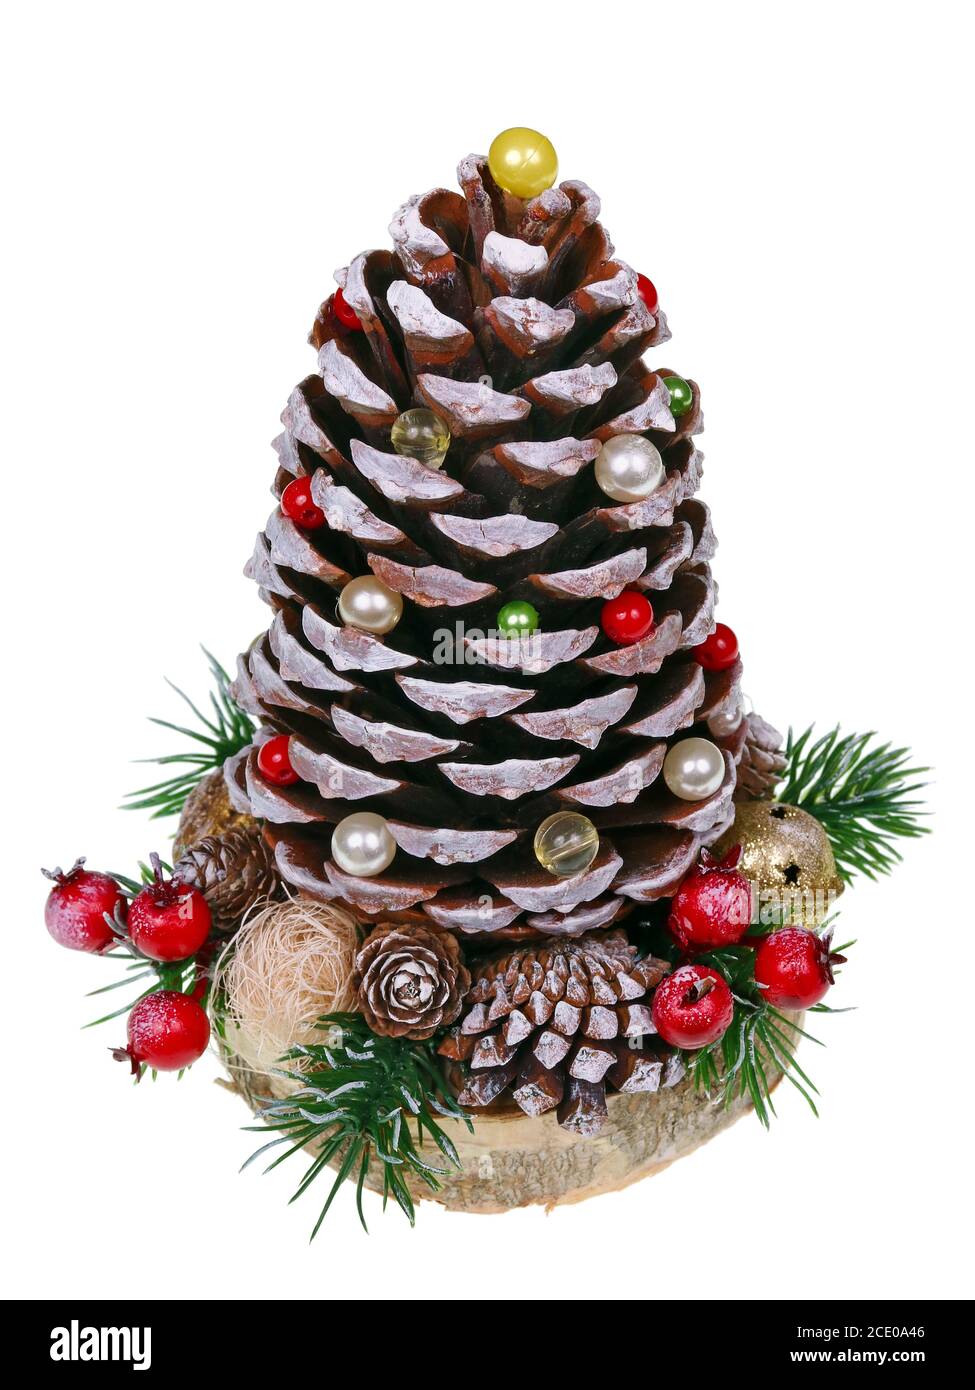 Christmas homemadefir tree in rustic style made large  cone of alpine european cedar tree , red berries  and pearls   isolated m Stock Photo